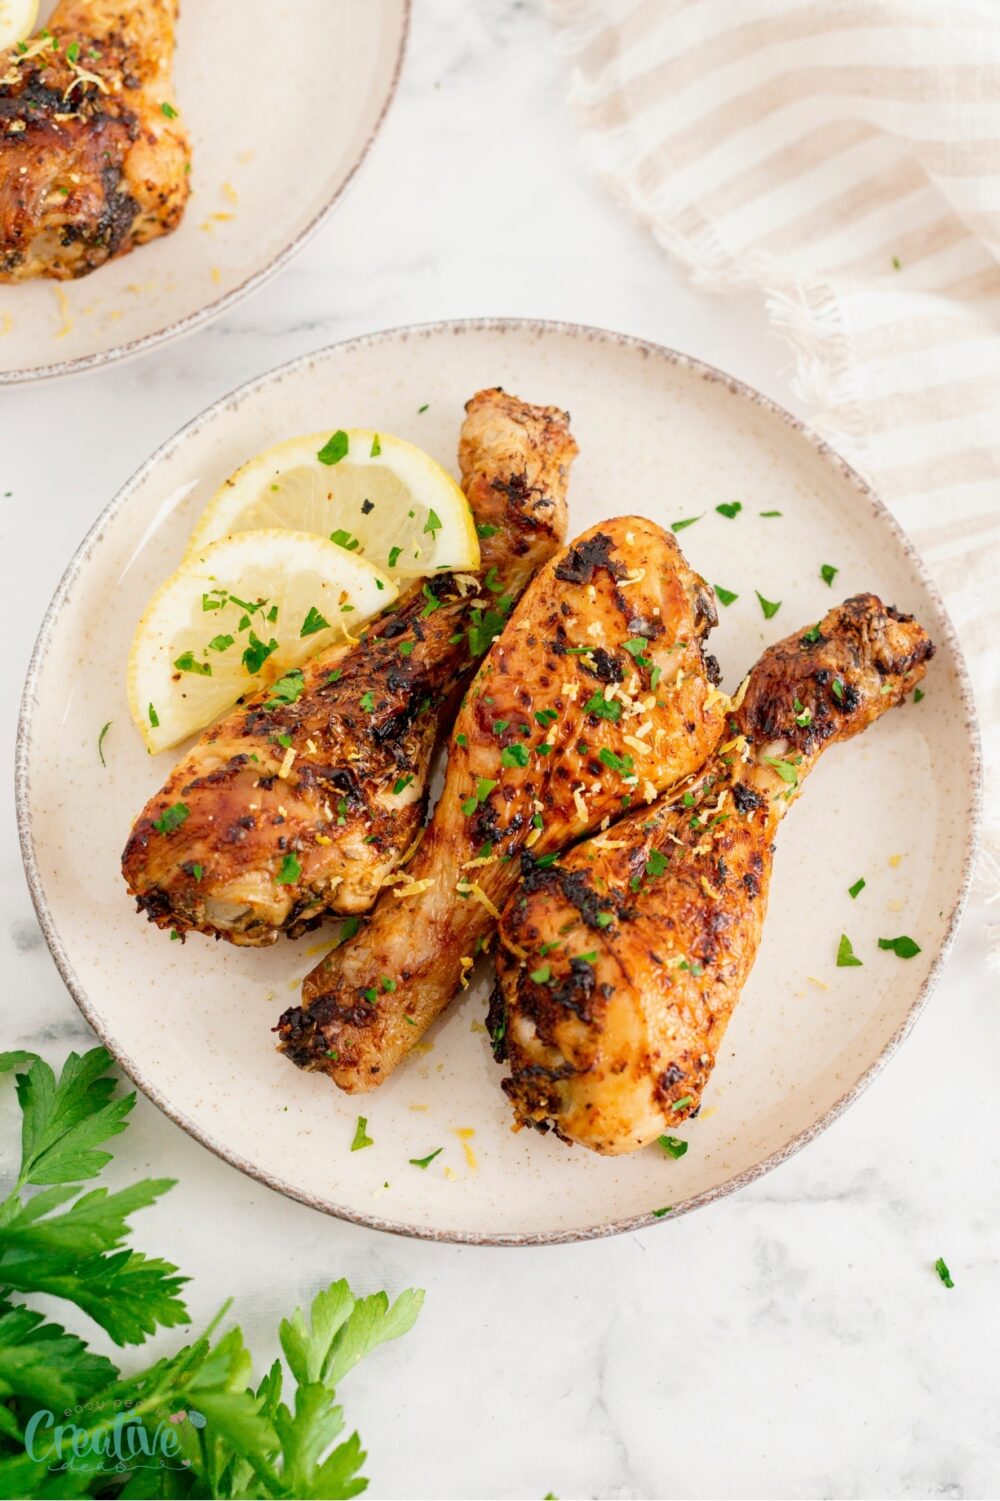 Tangy air fryer lemon garlic chicken drumsticks, a simple yet flavorful addition to any meal.